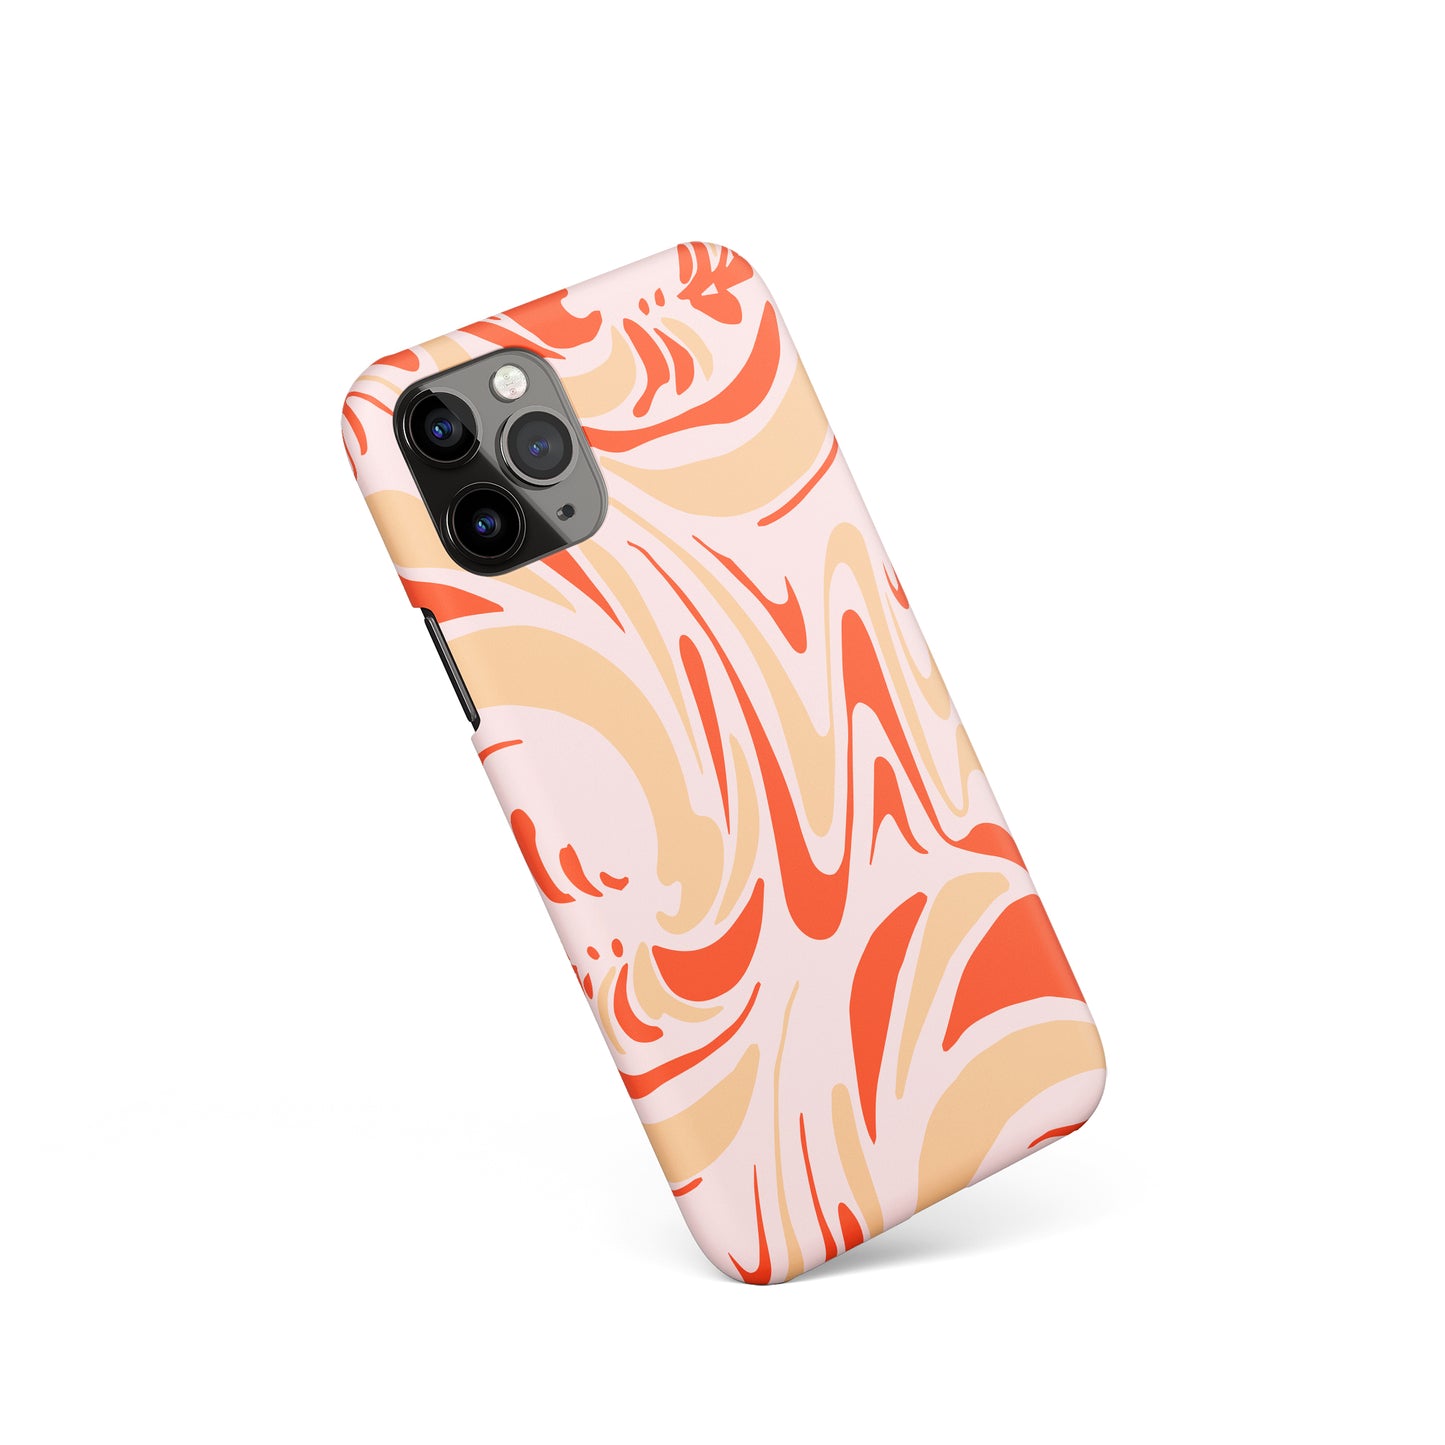 Candy Art iPhone Case